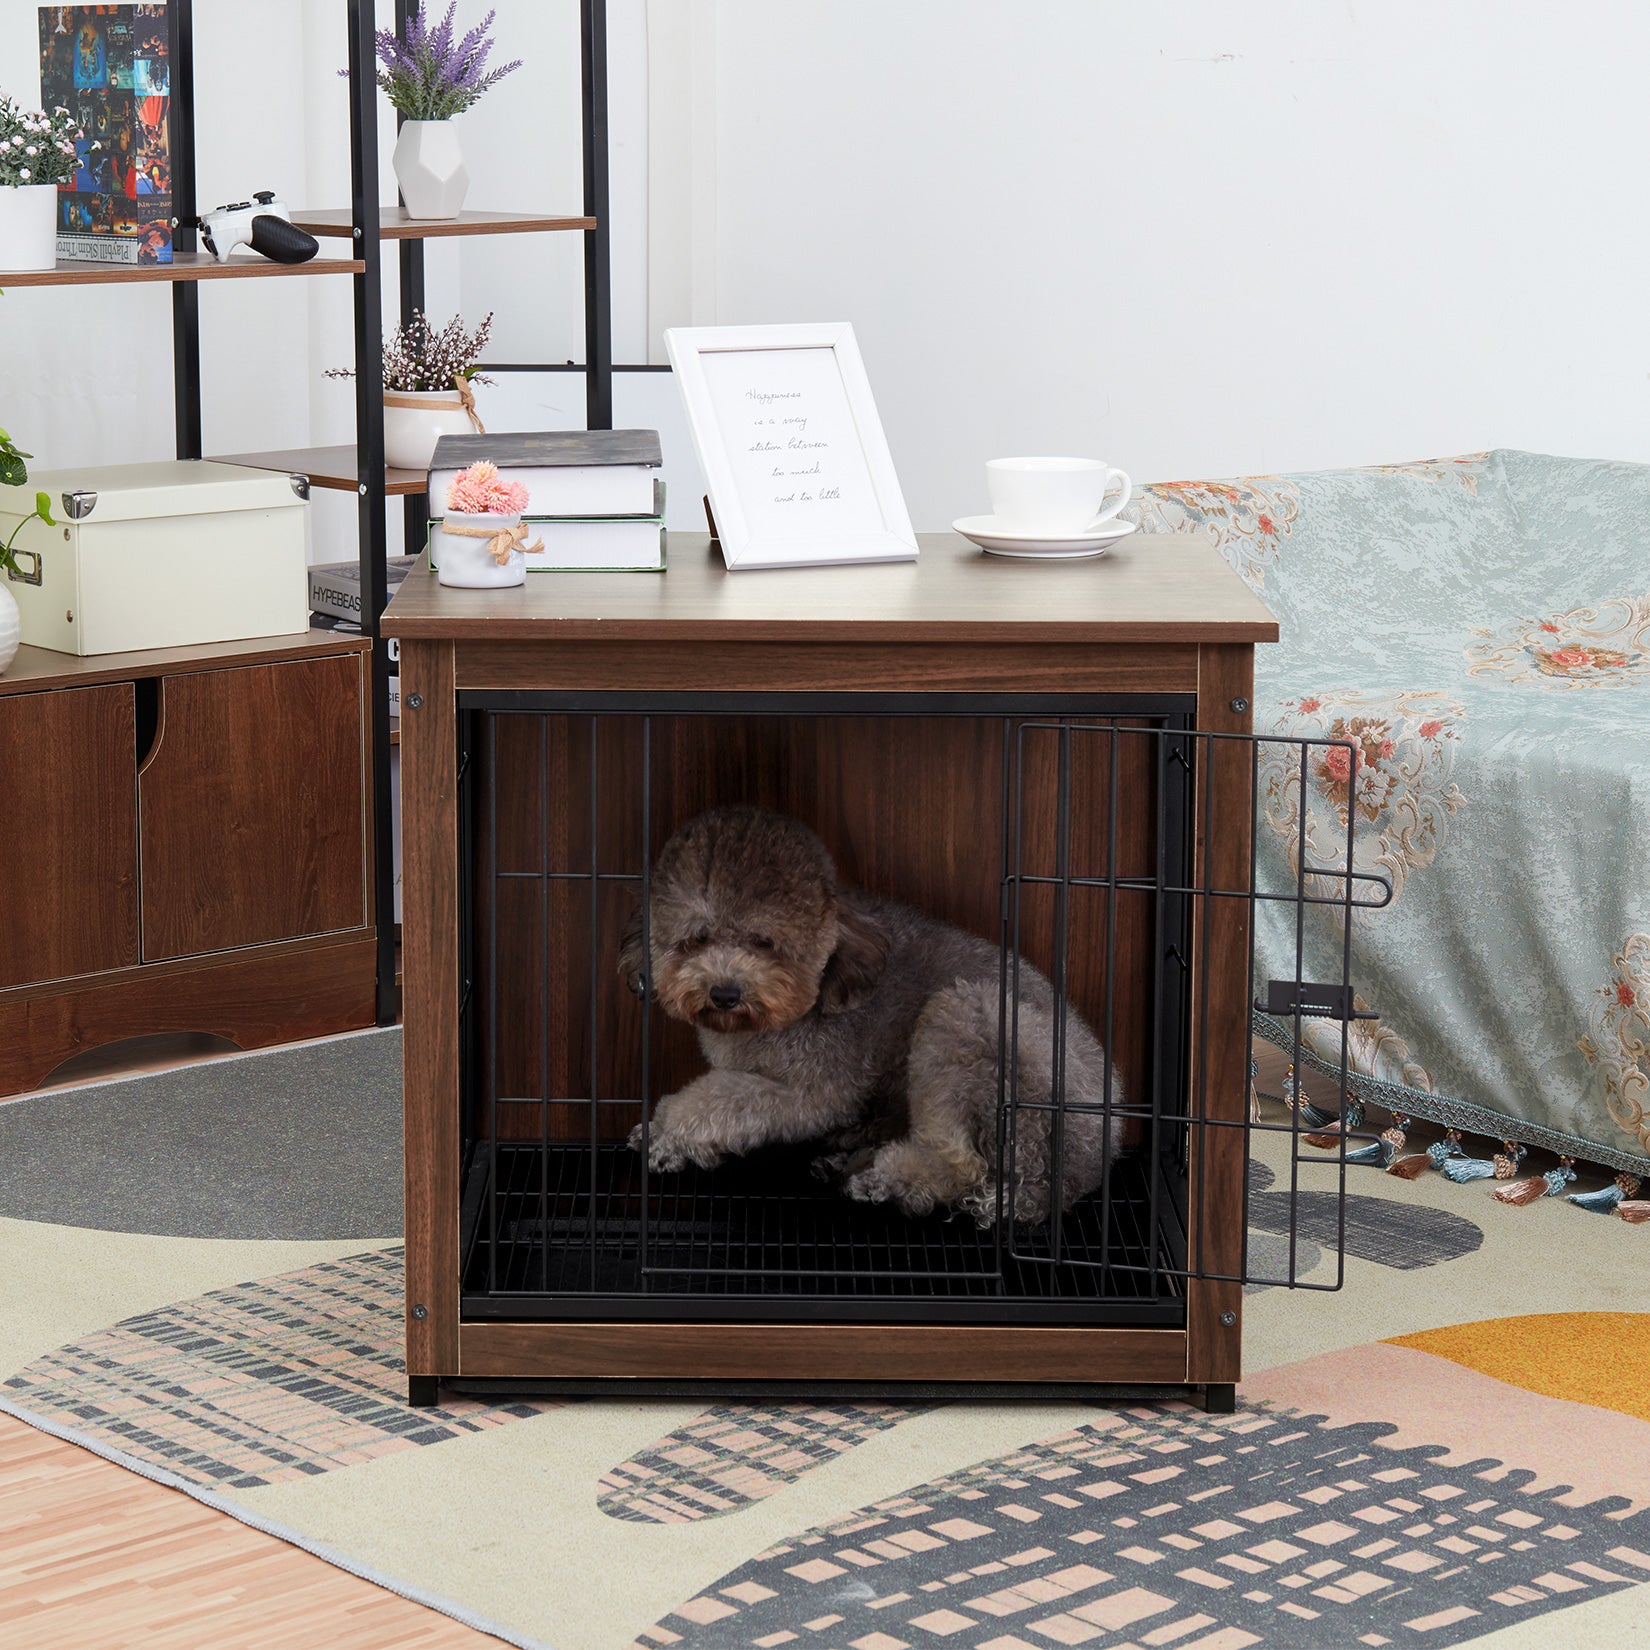 The bingopaw dog cage is made of wood and metal with a nice-looking walnut color finish. Application in all kinds of interiors. Dual doors for multiple entry options, latch mechanism keep your dogs secure. It also features a removable tray to make cleaning up accidents or spills easy.